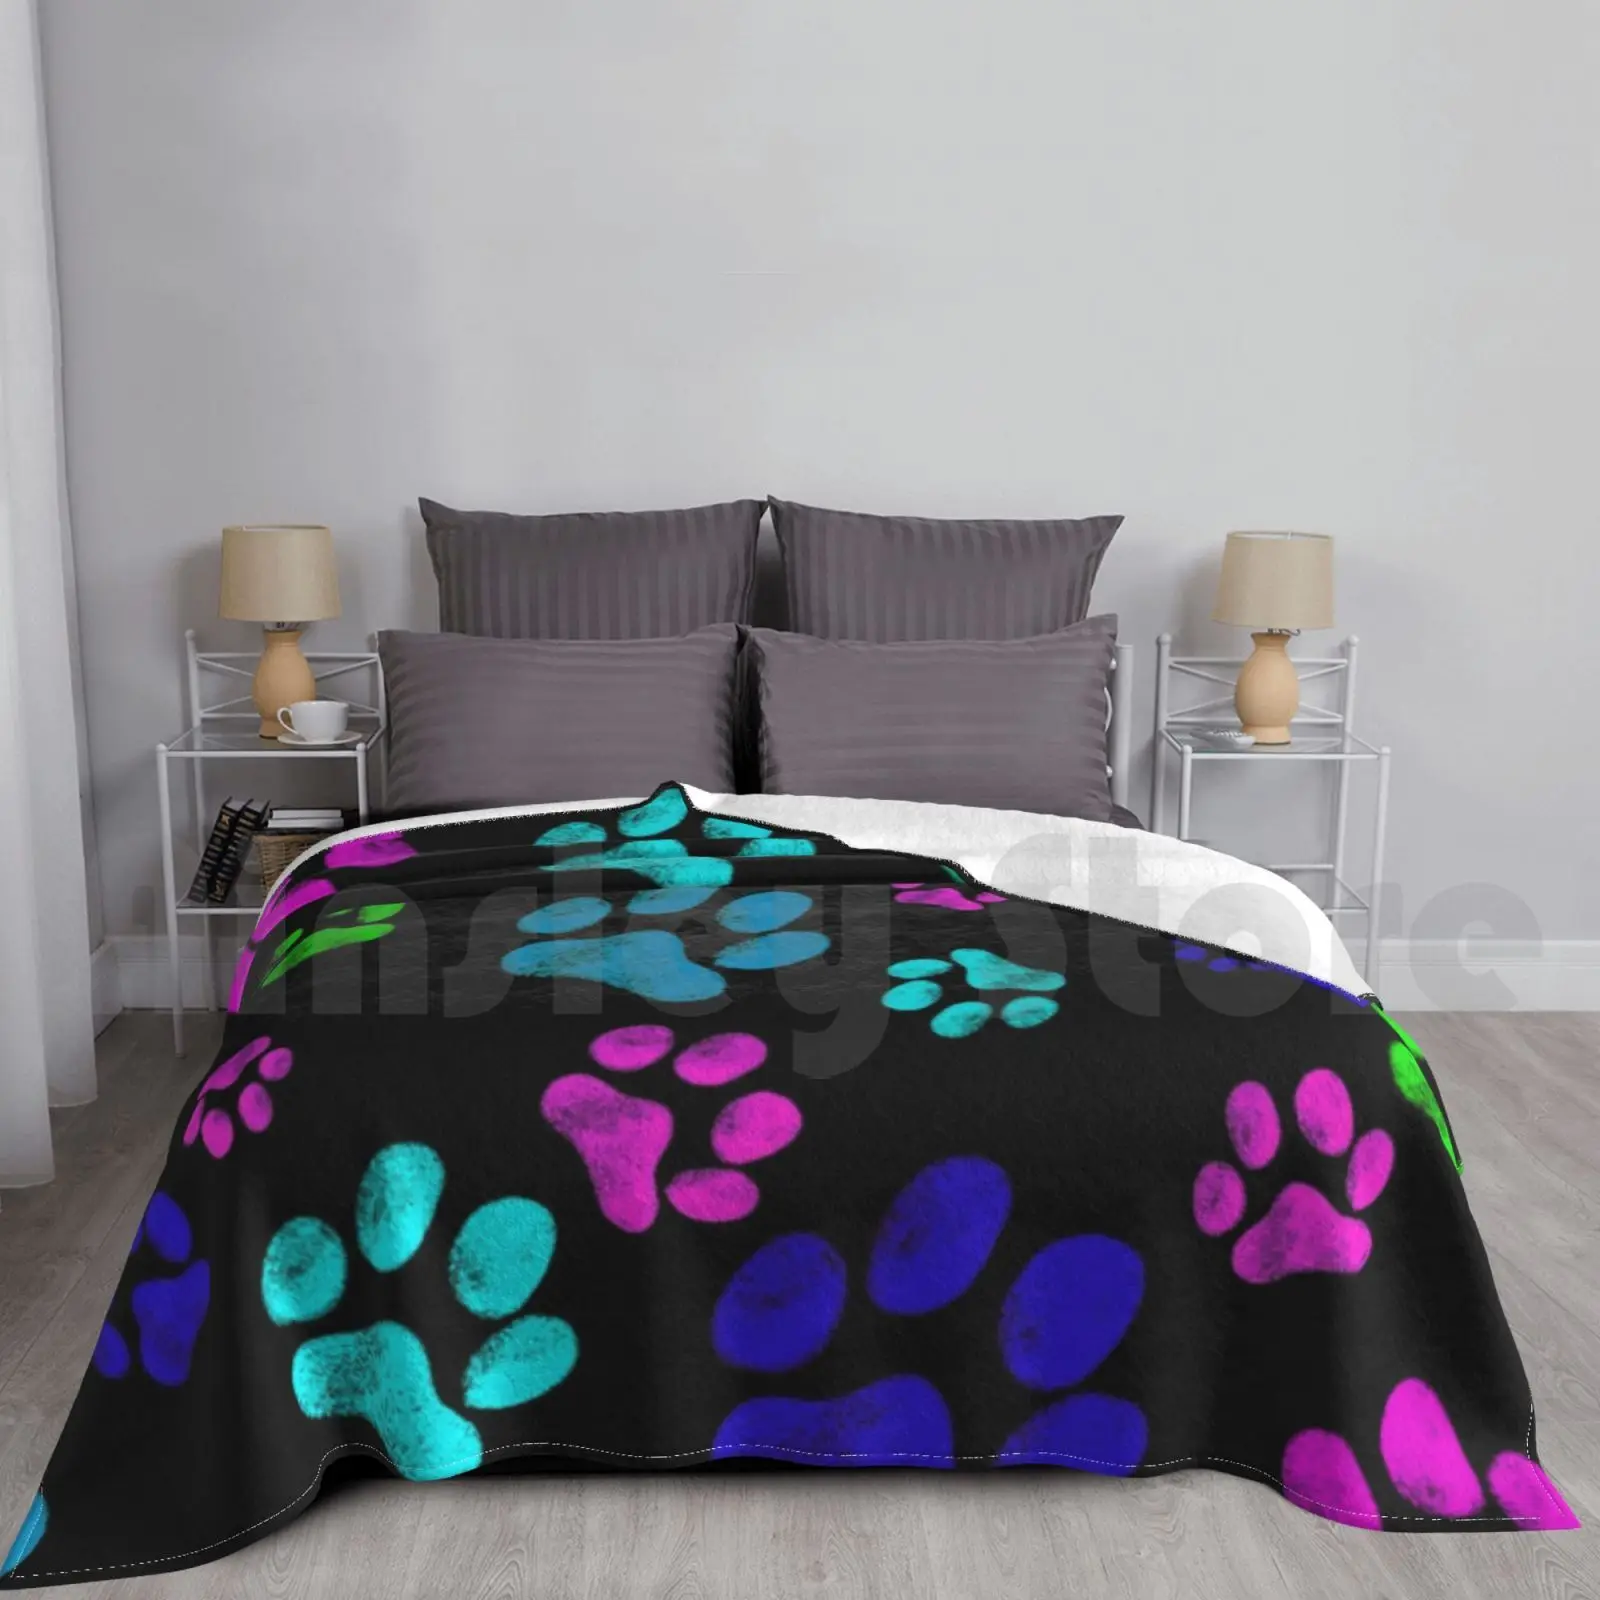 

Neon Paws Blanket For Sofa Bed Travel Neon Neon Colors Bright Bright Colors Paw Dogs Puppy Dog Dog Animal Lover